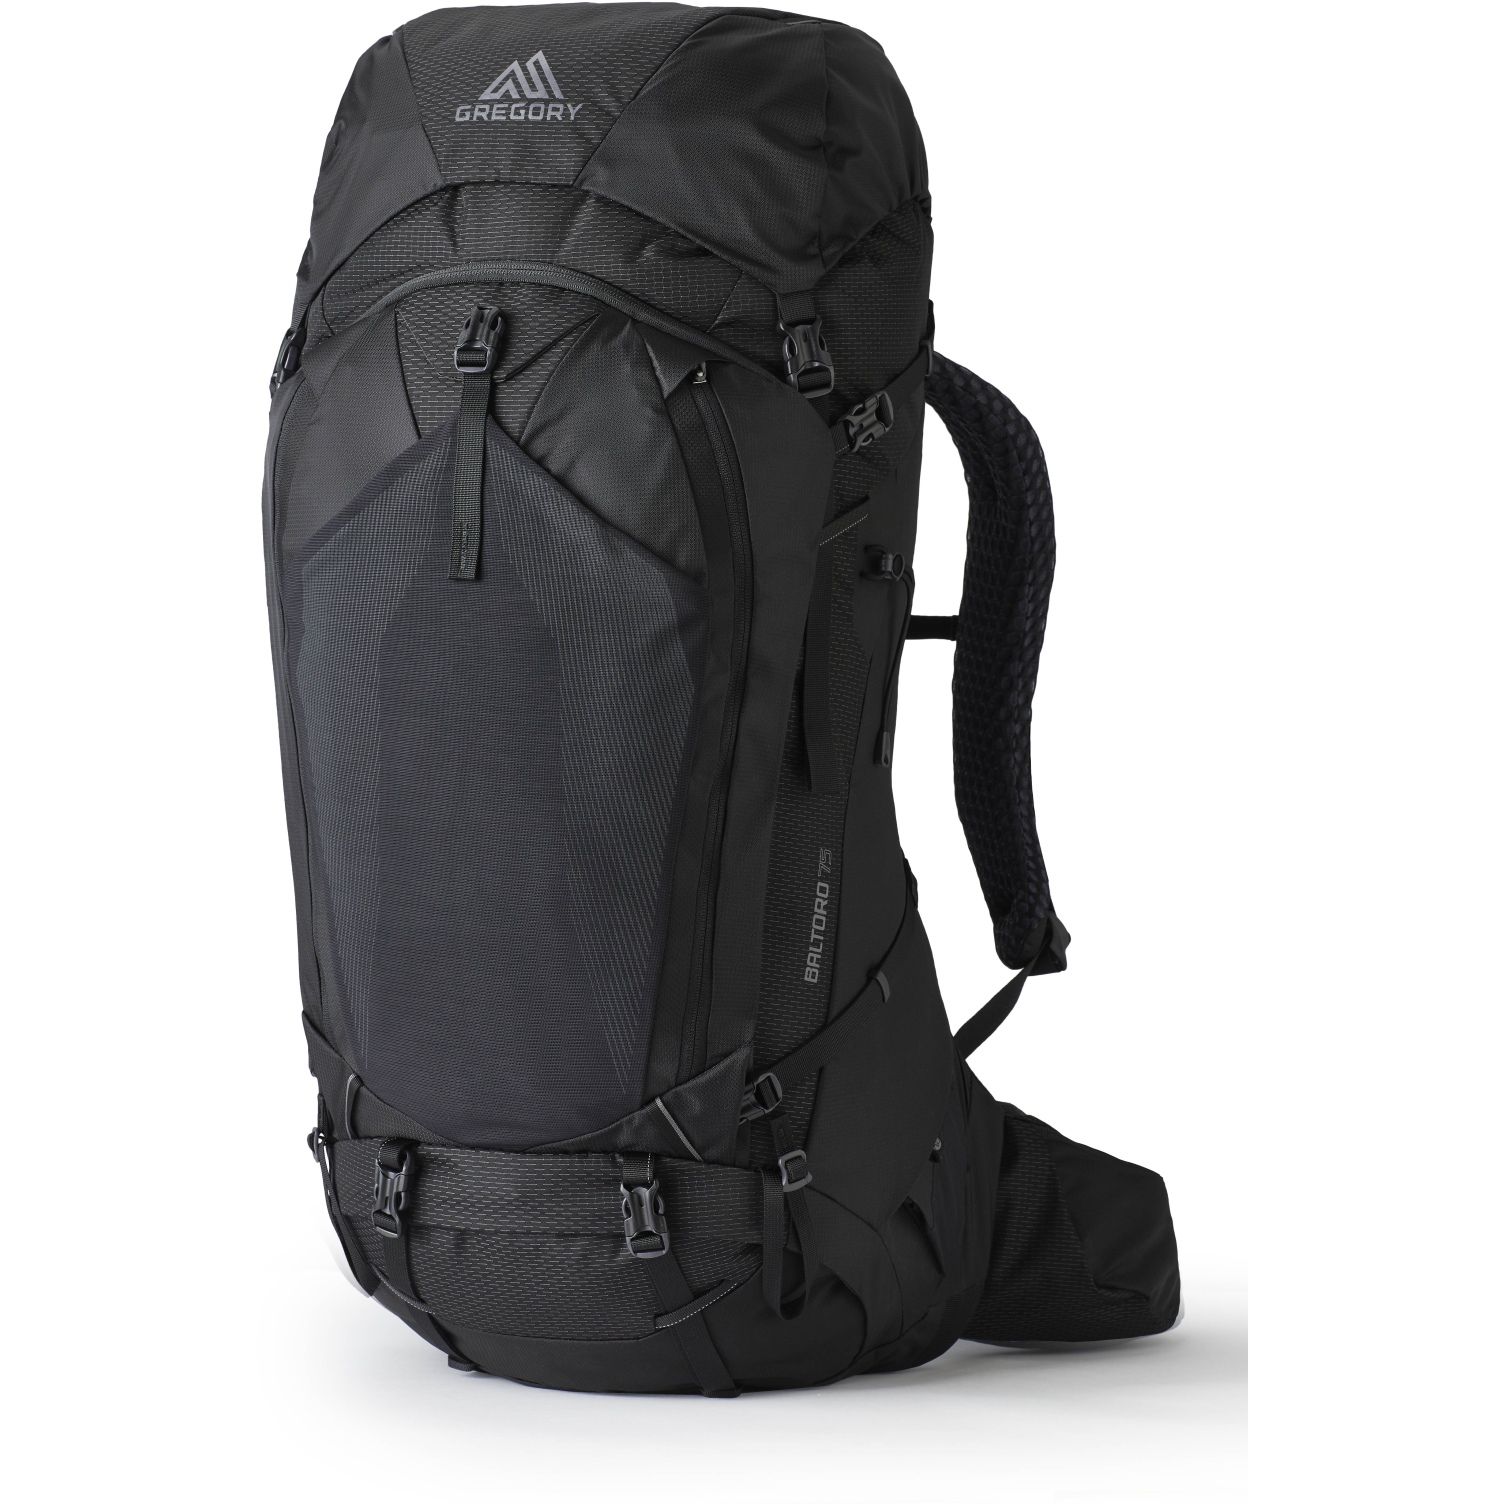 Picture of Gregory Baltoro 75 Backpack - Obsidian Black